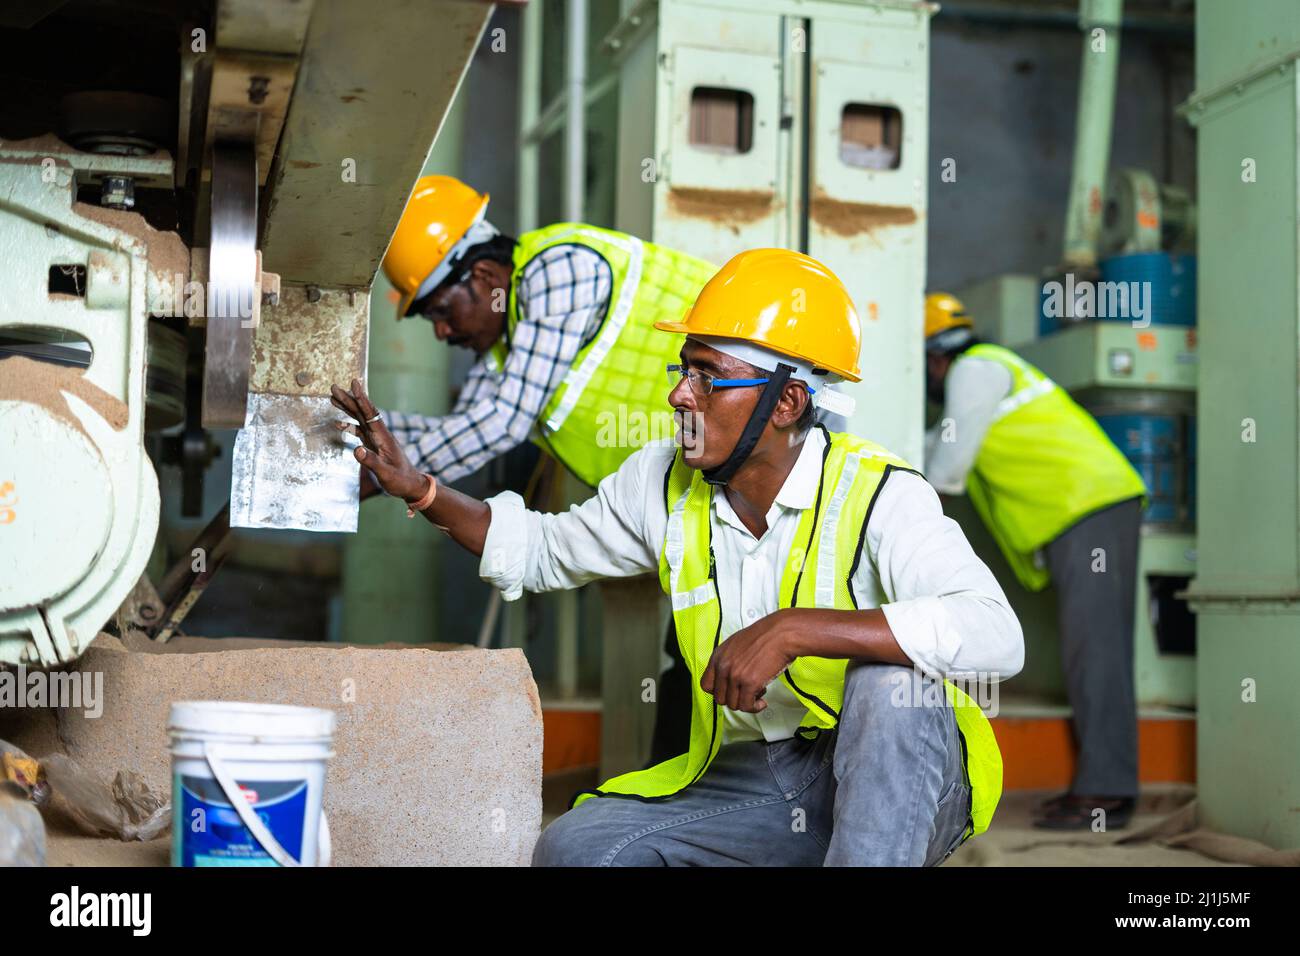 Industrial workers busy working on machinery with safety helmet at factory - concept of blue collar jobs, teamwork and occupation Stock Photo